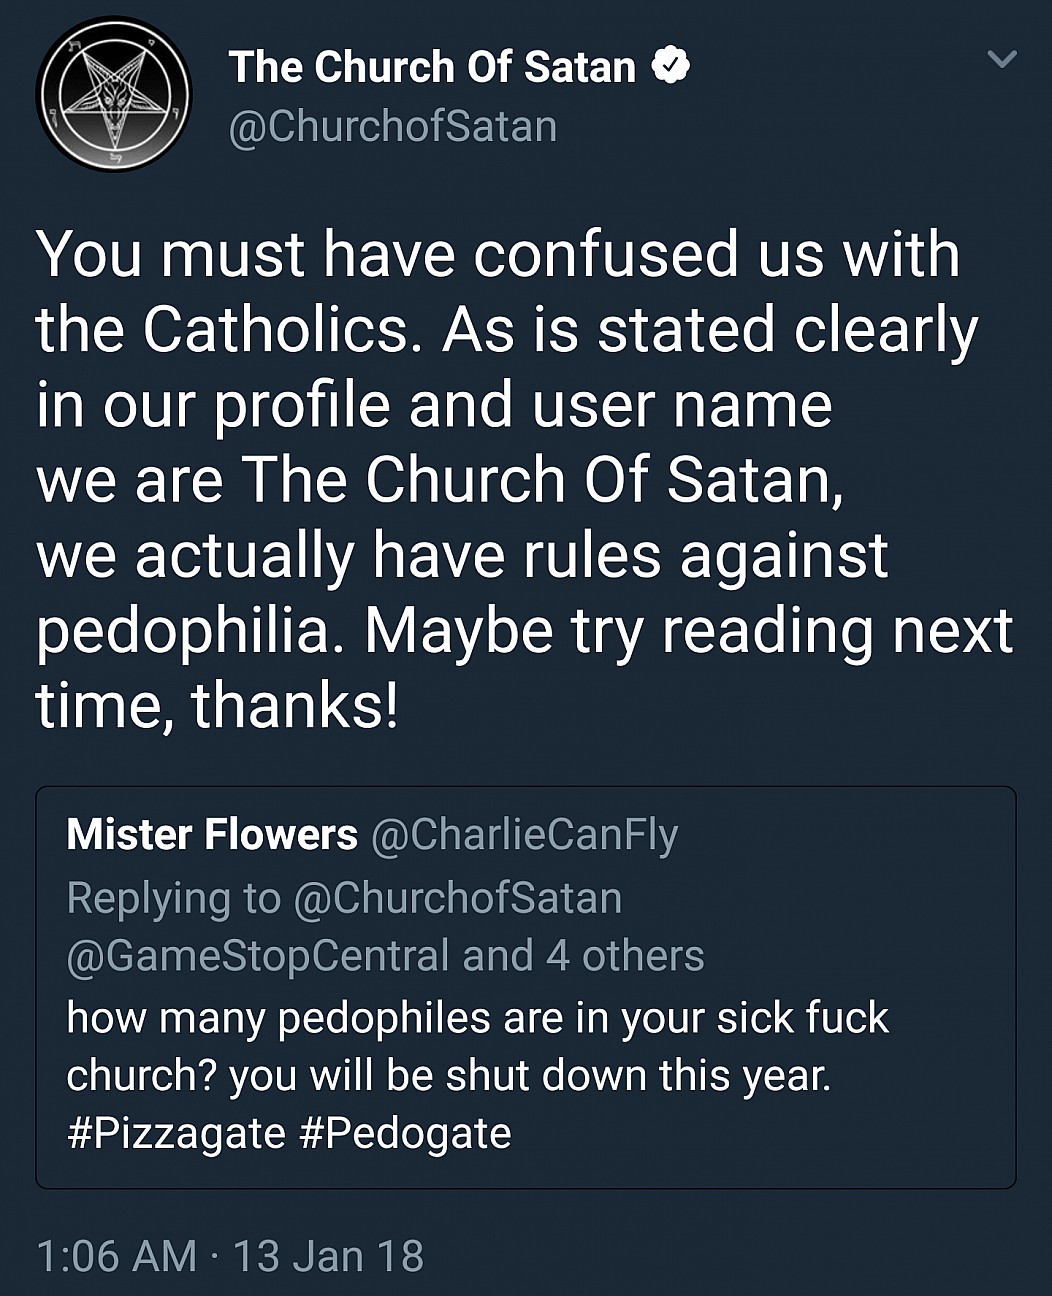 cool pic sky - The Church of Satan You must have confused us with the Catholics. As is stated clearly in our profile and user name we are The Church of Satan, we actually have rules against pedophilia. Maybe try reading next time, thanks! Mister Flowers a